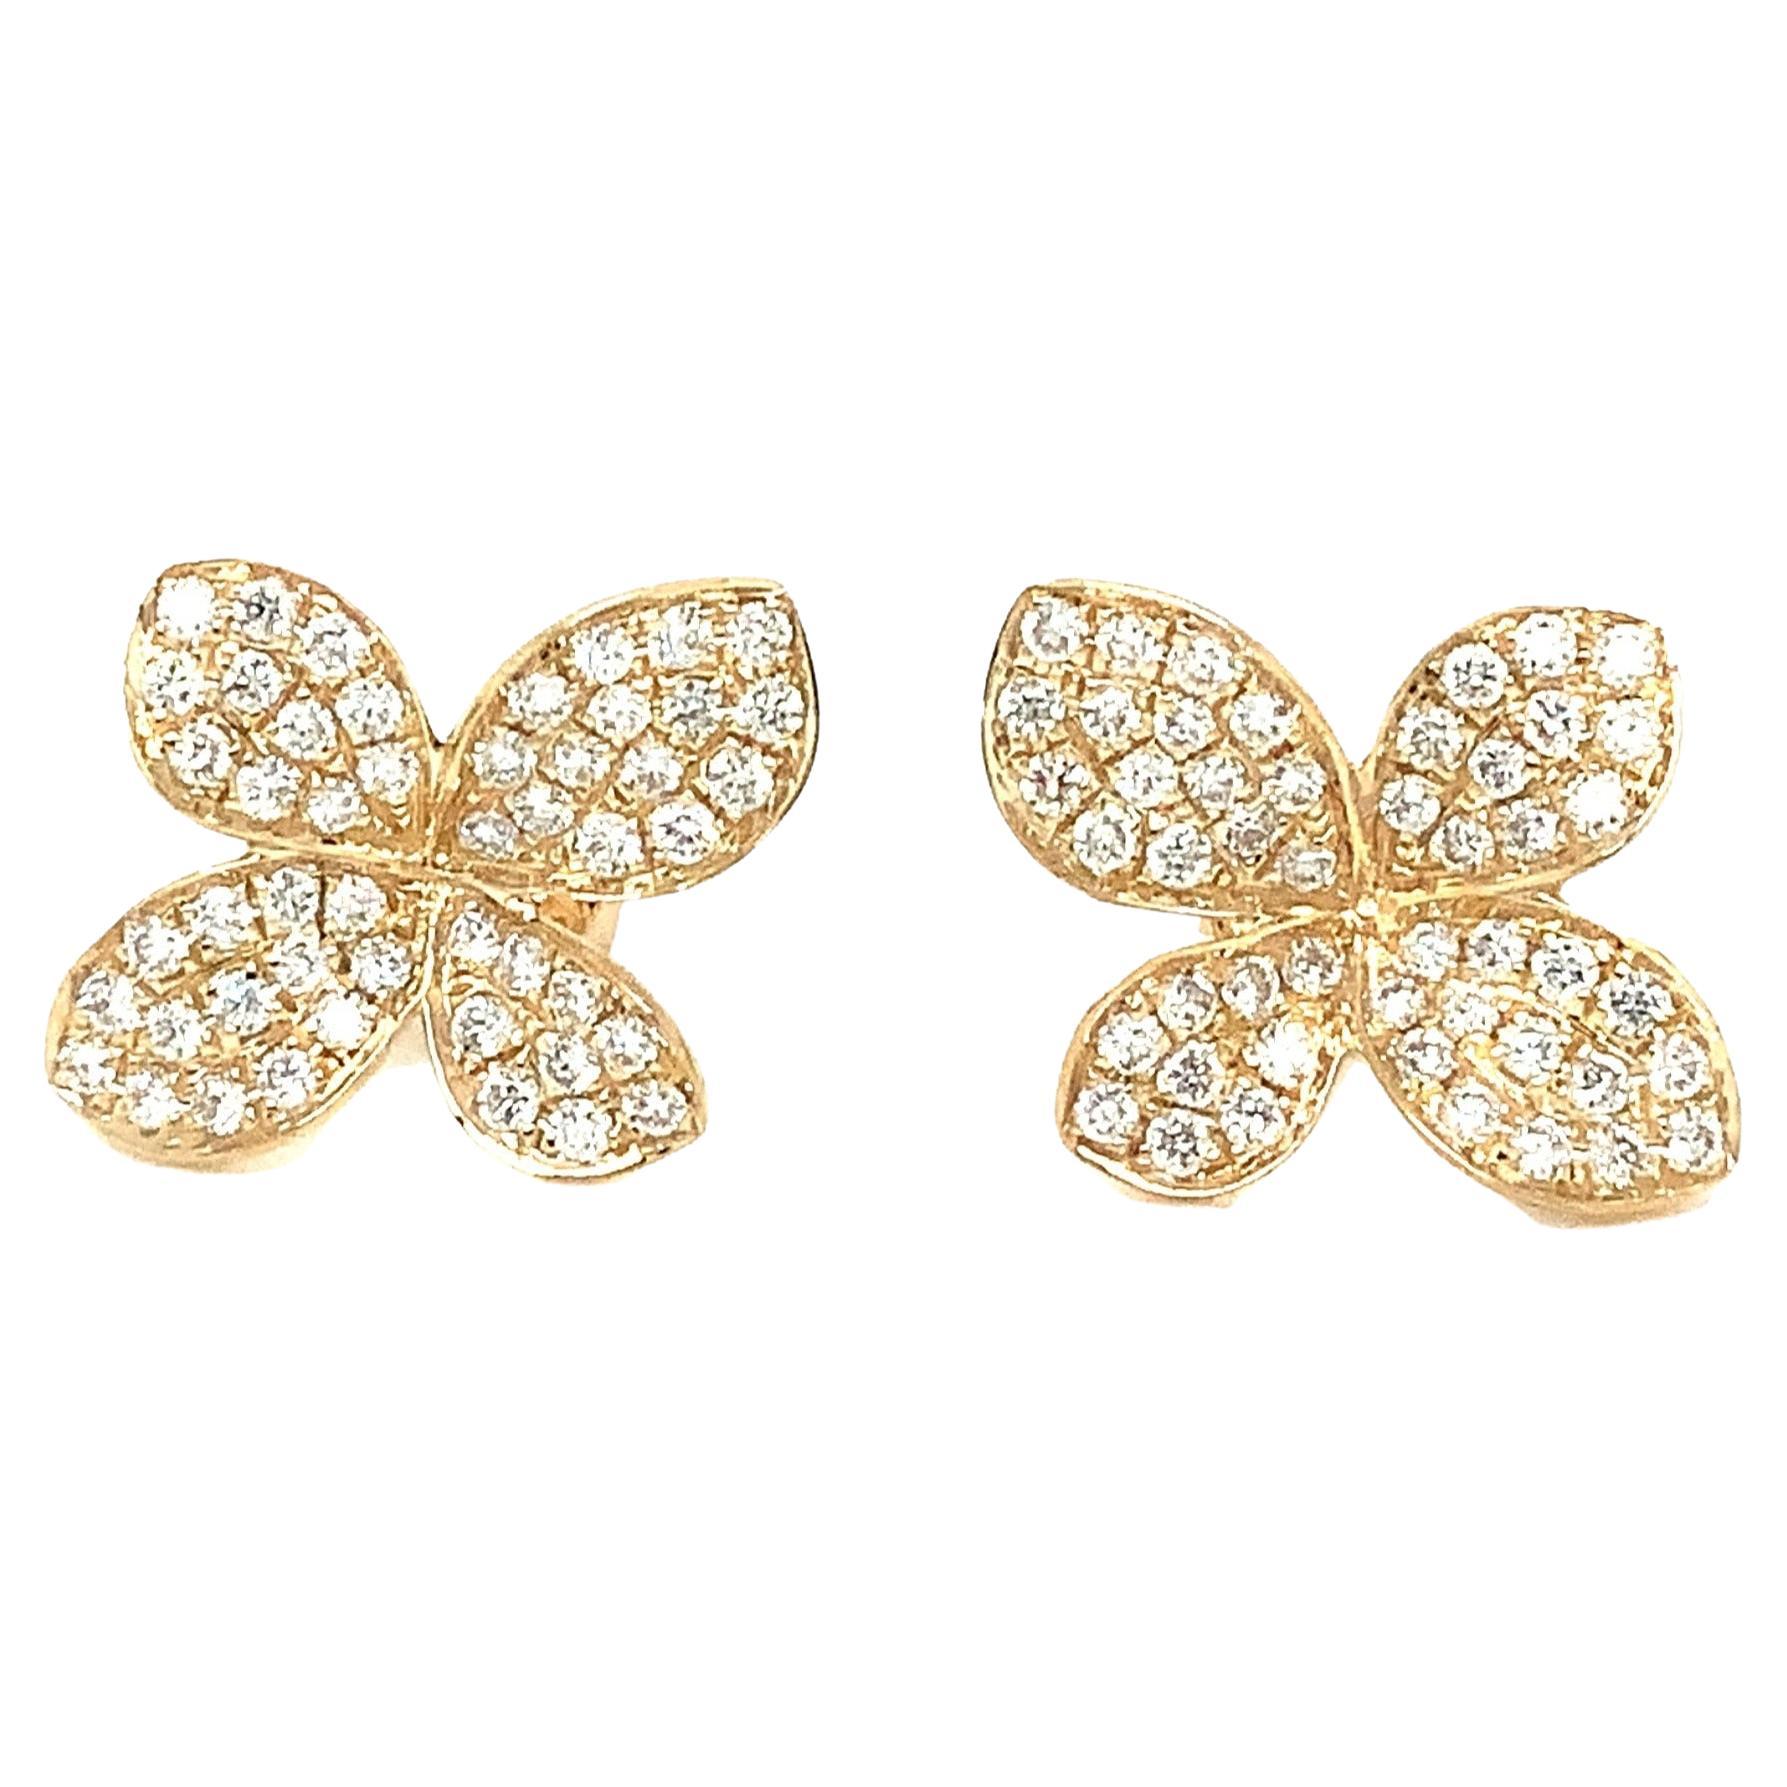 Afarin Collection Pavé Petite Garden Diamond Earrings in 18 Kt Yellow Gold